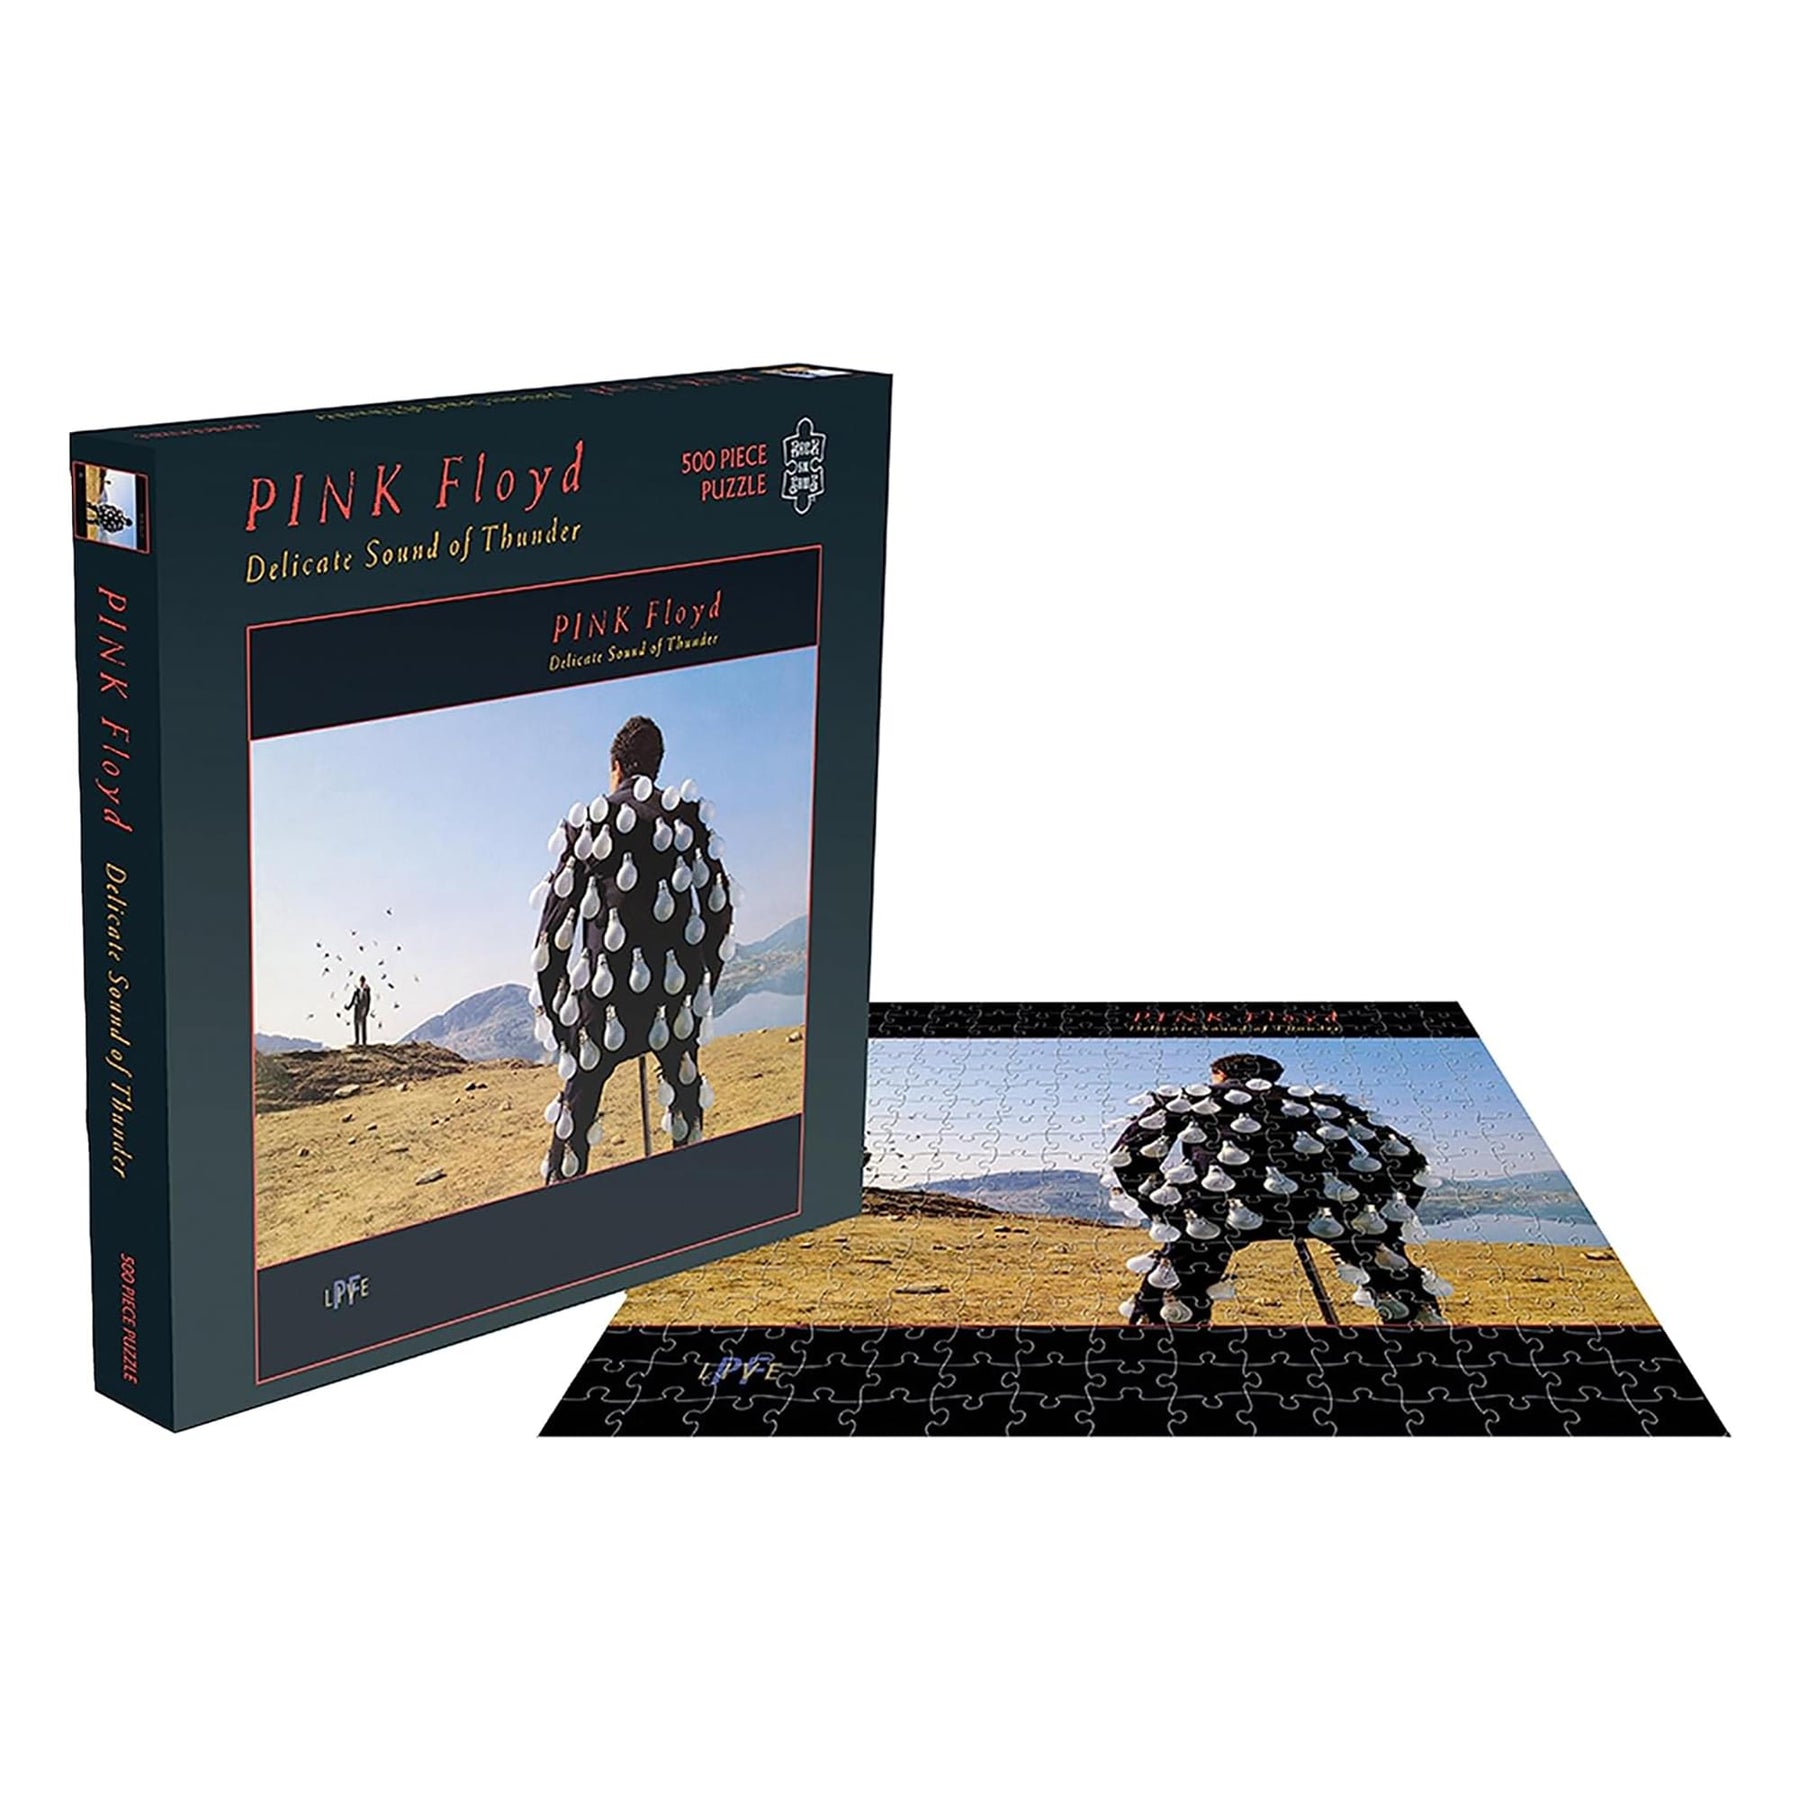 Pink Floyd Delicate Sound Of Thunder 500 Piece Jigsaw Puzzle